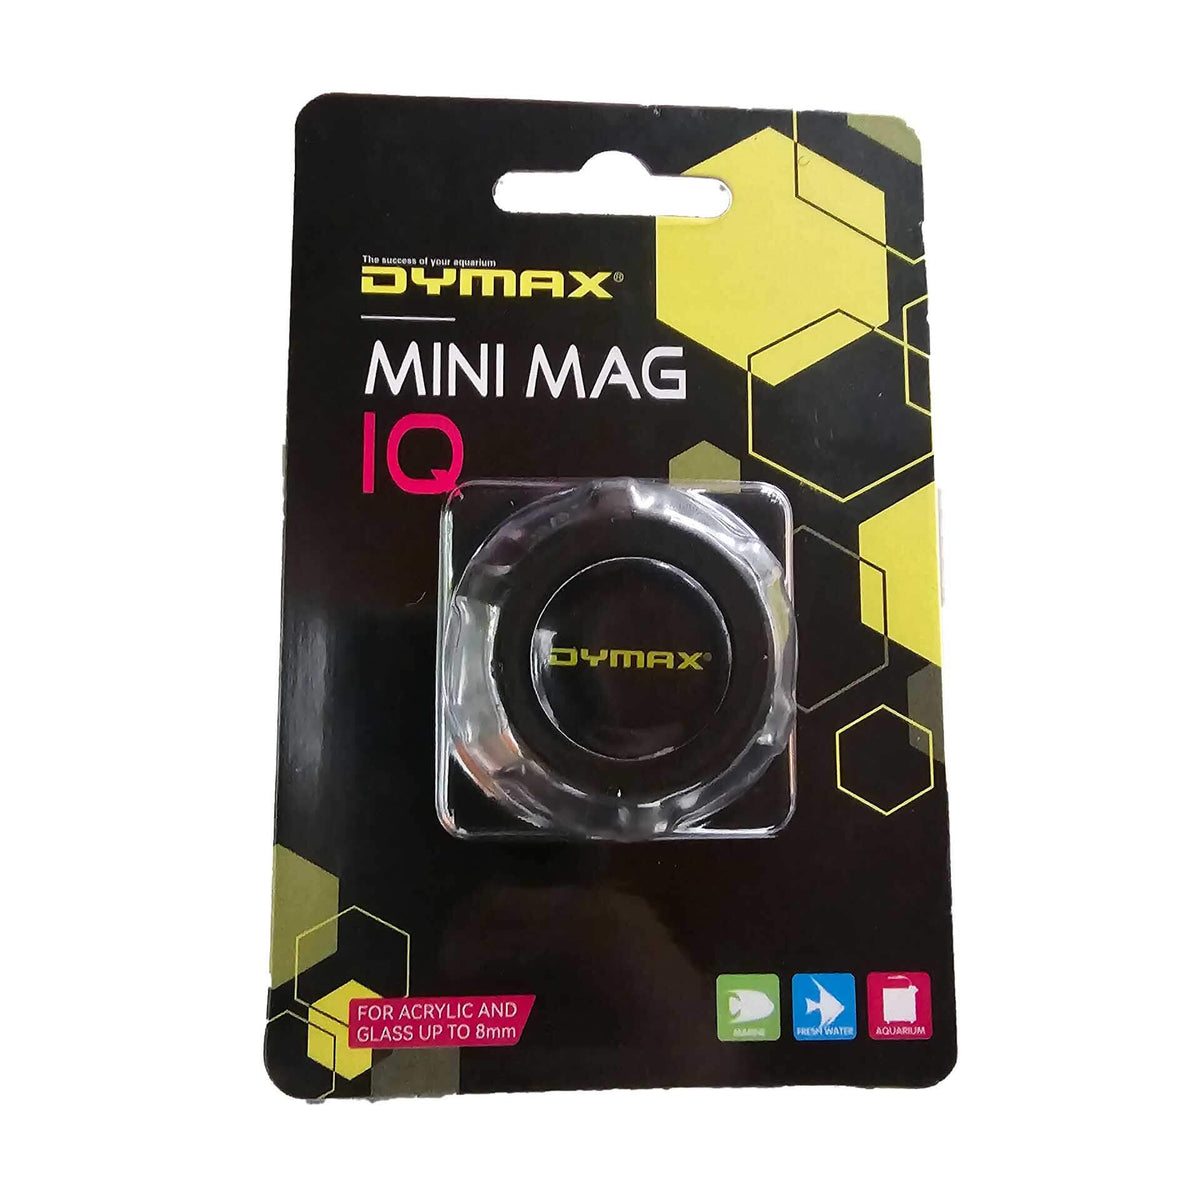 Dymax Mini Mag Cleaner - IQ For Acrylic and Glass up to 8mm